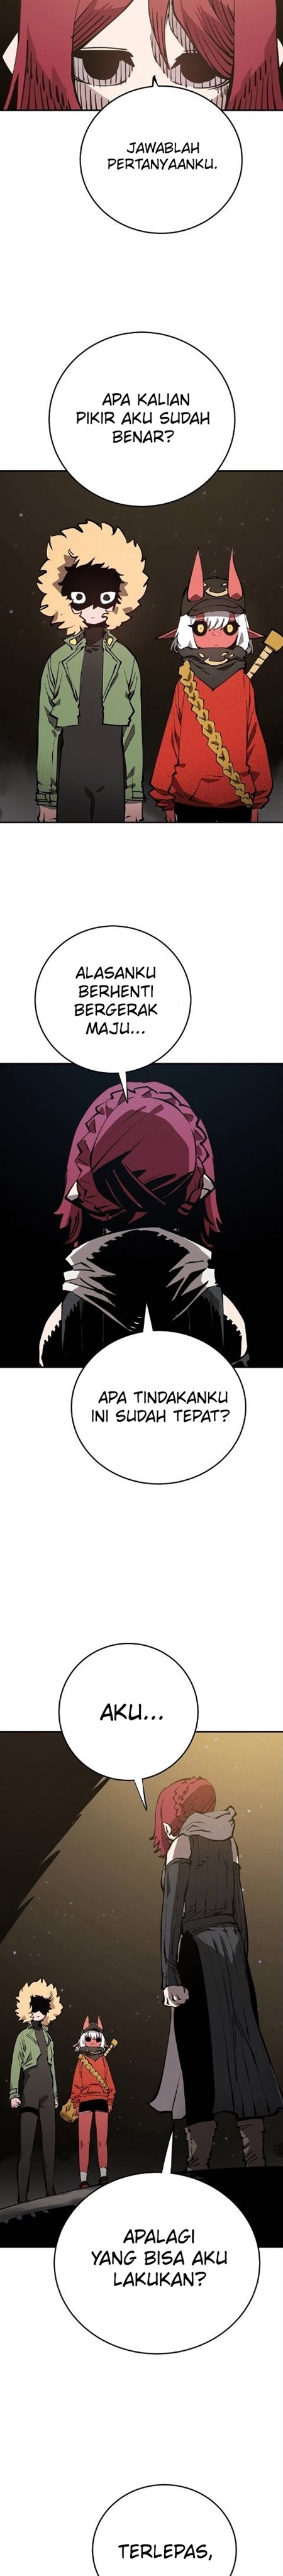 Player Chapter 99 Bahasa Indonesia